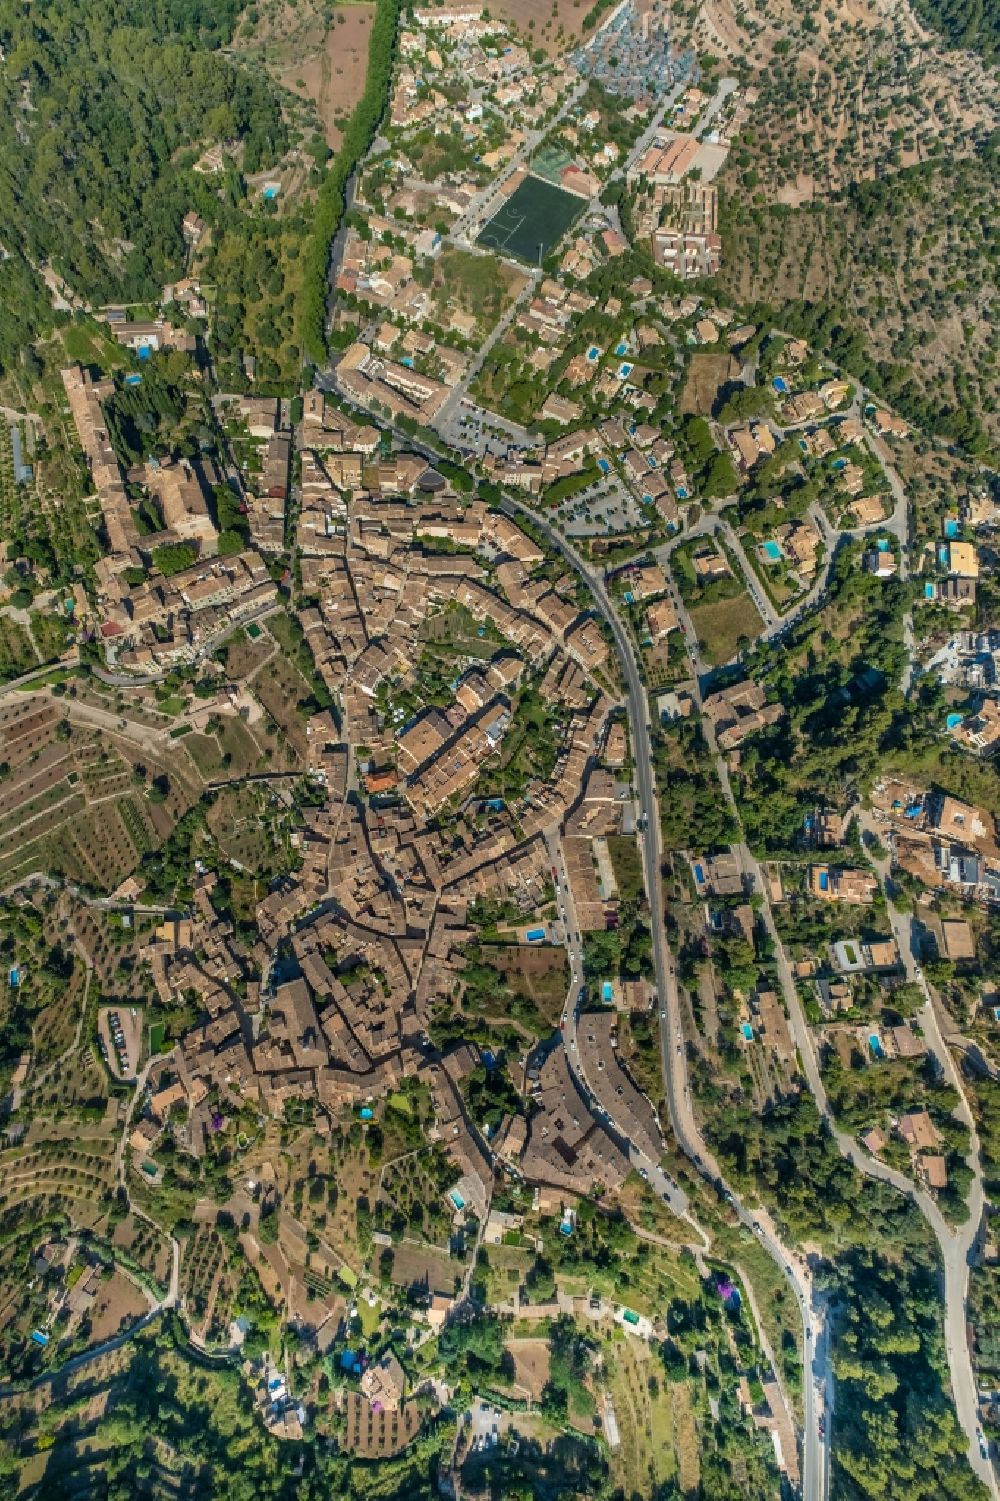 Vertical aerial photograph Valldemosa - Vertical aerial view from the satellite perspective of the town View of the streets and houses of the residential areas in Valldemosa in Islas Baleares, Spain